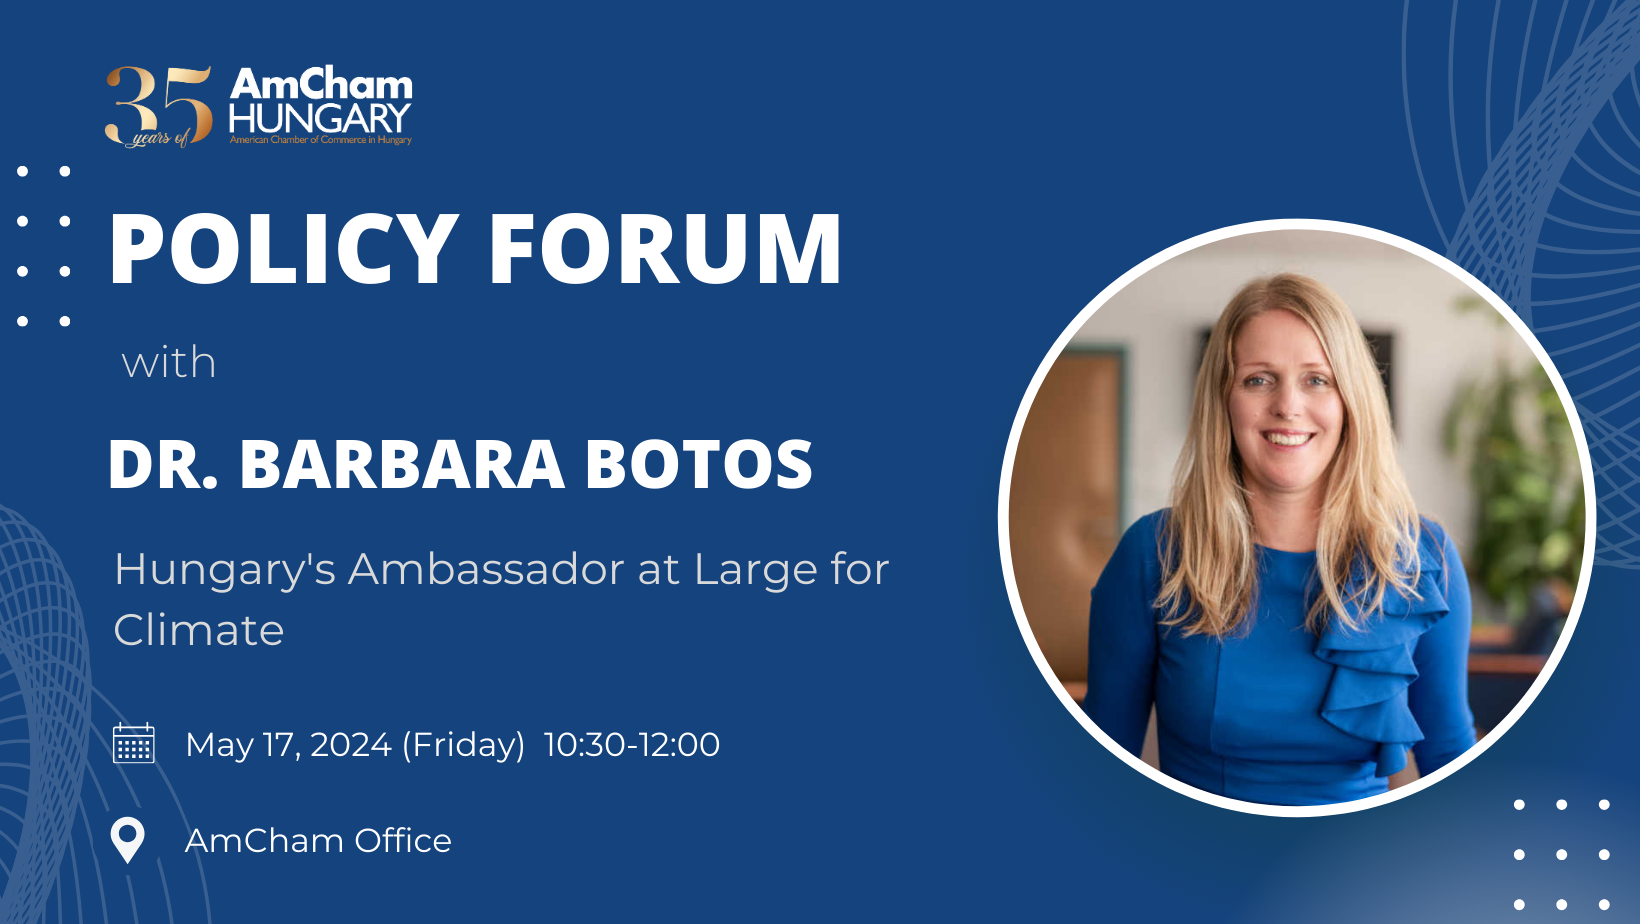 AmCham Policy Forum with Dr. Barbara Botos, Climate Ambassador at Large